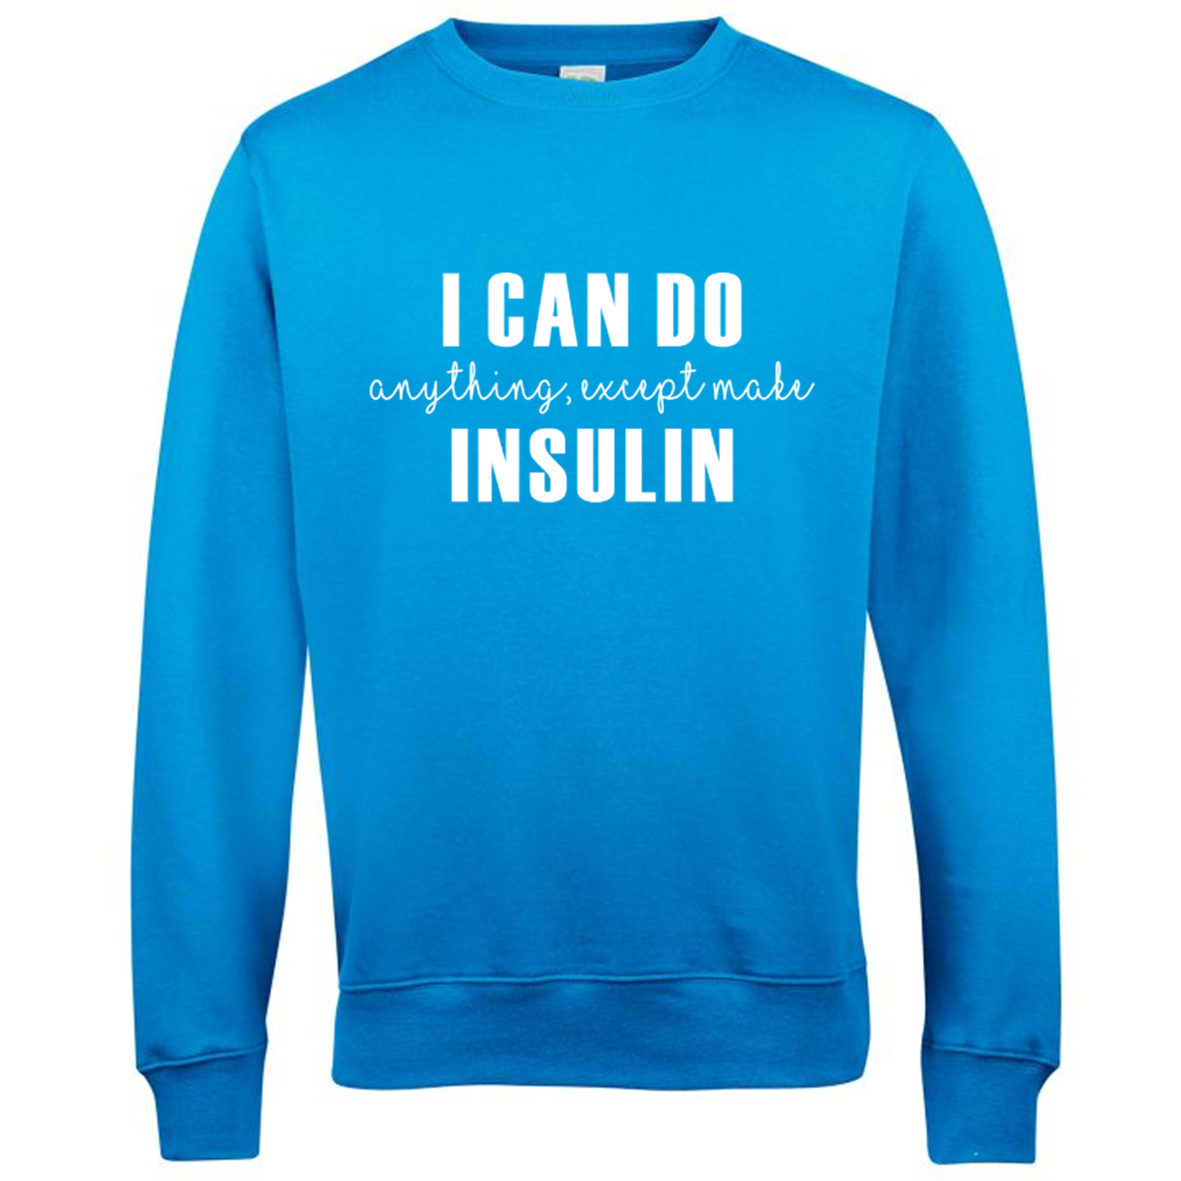 I Can Do Anything, Except Make Insulin Sweatshirt